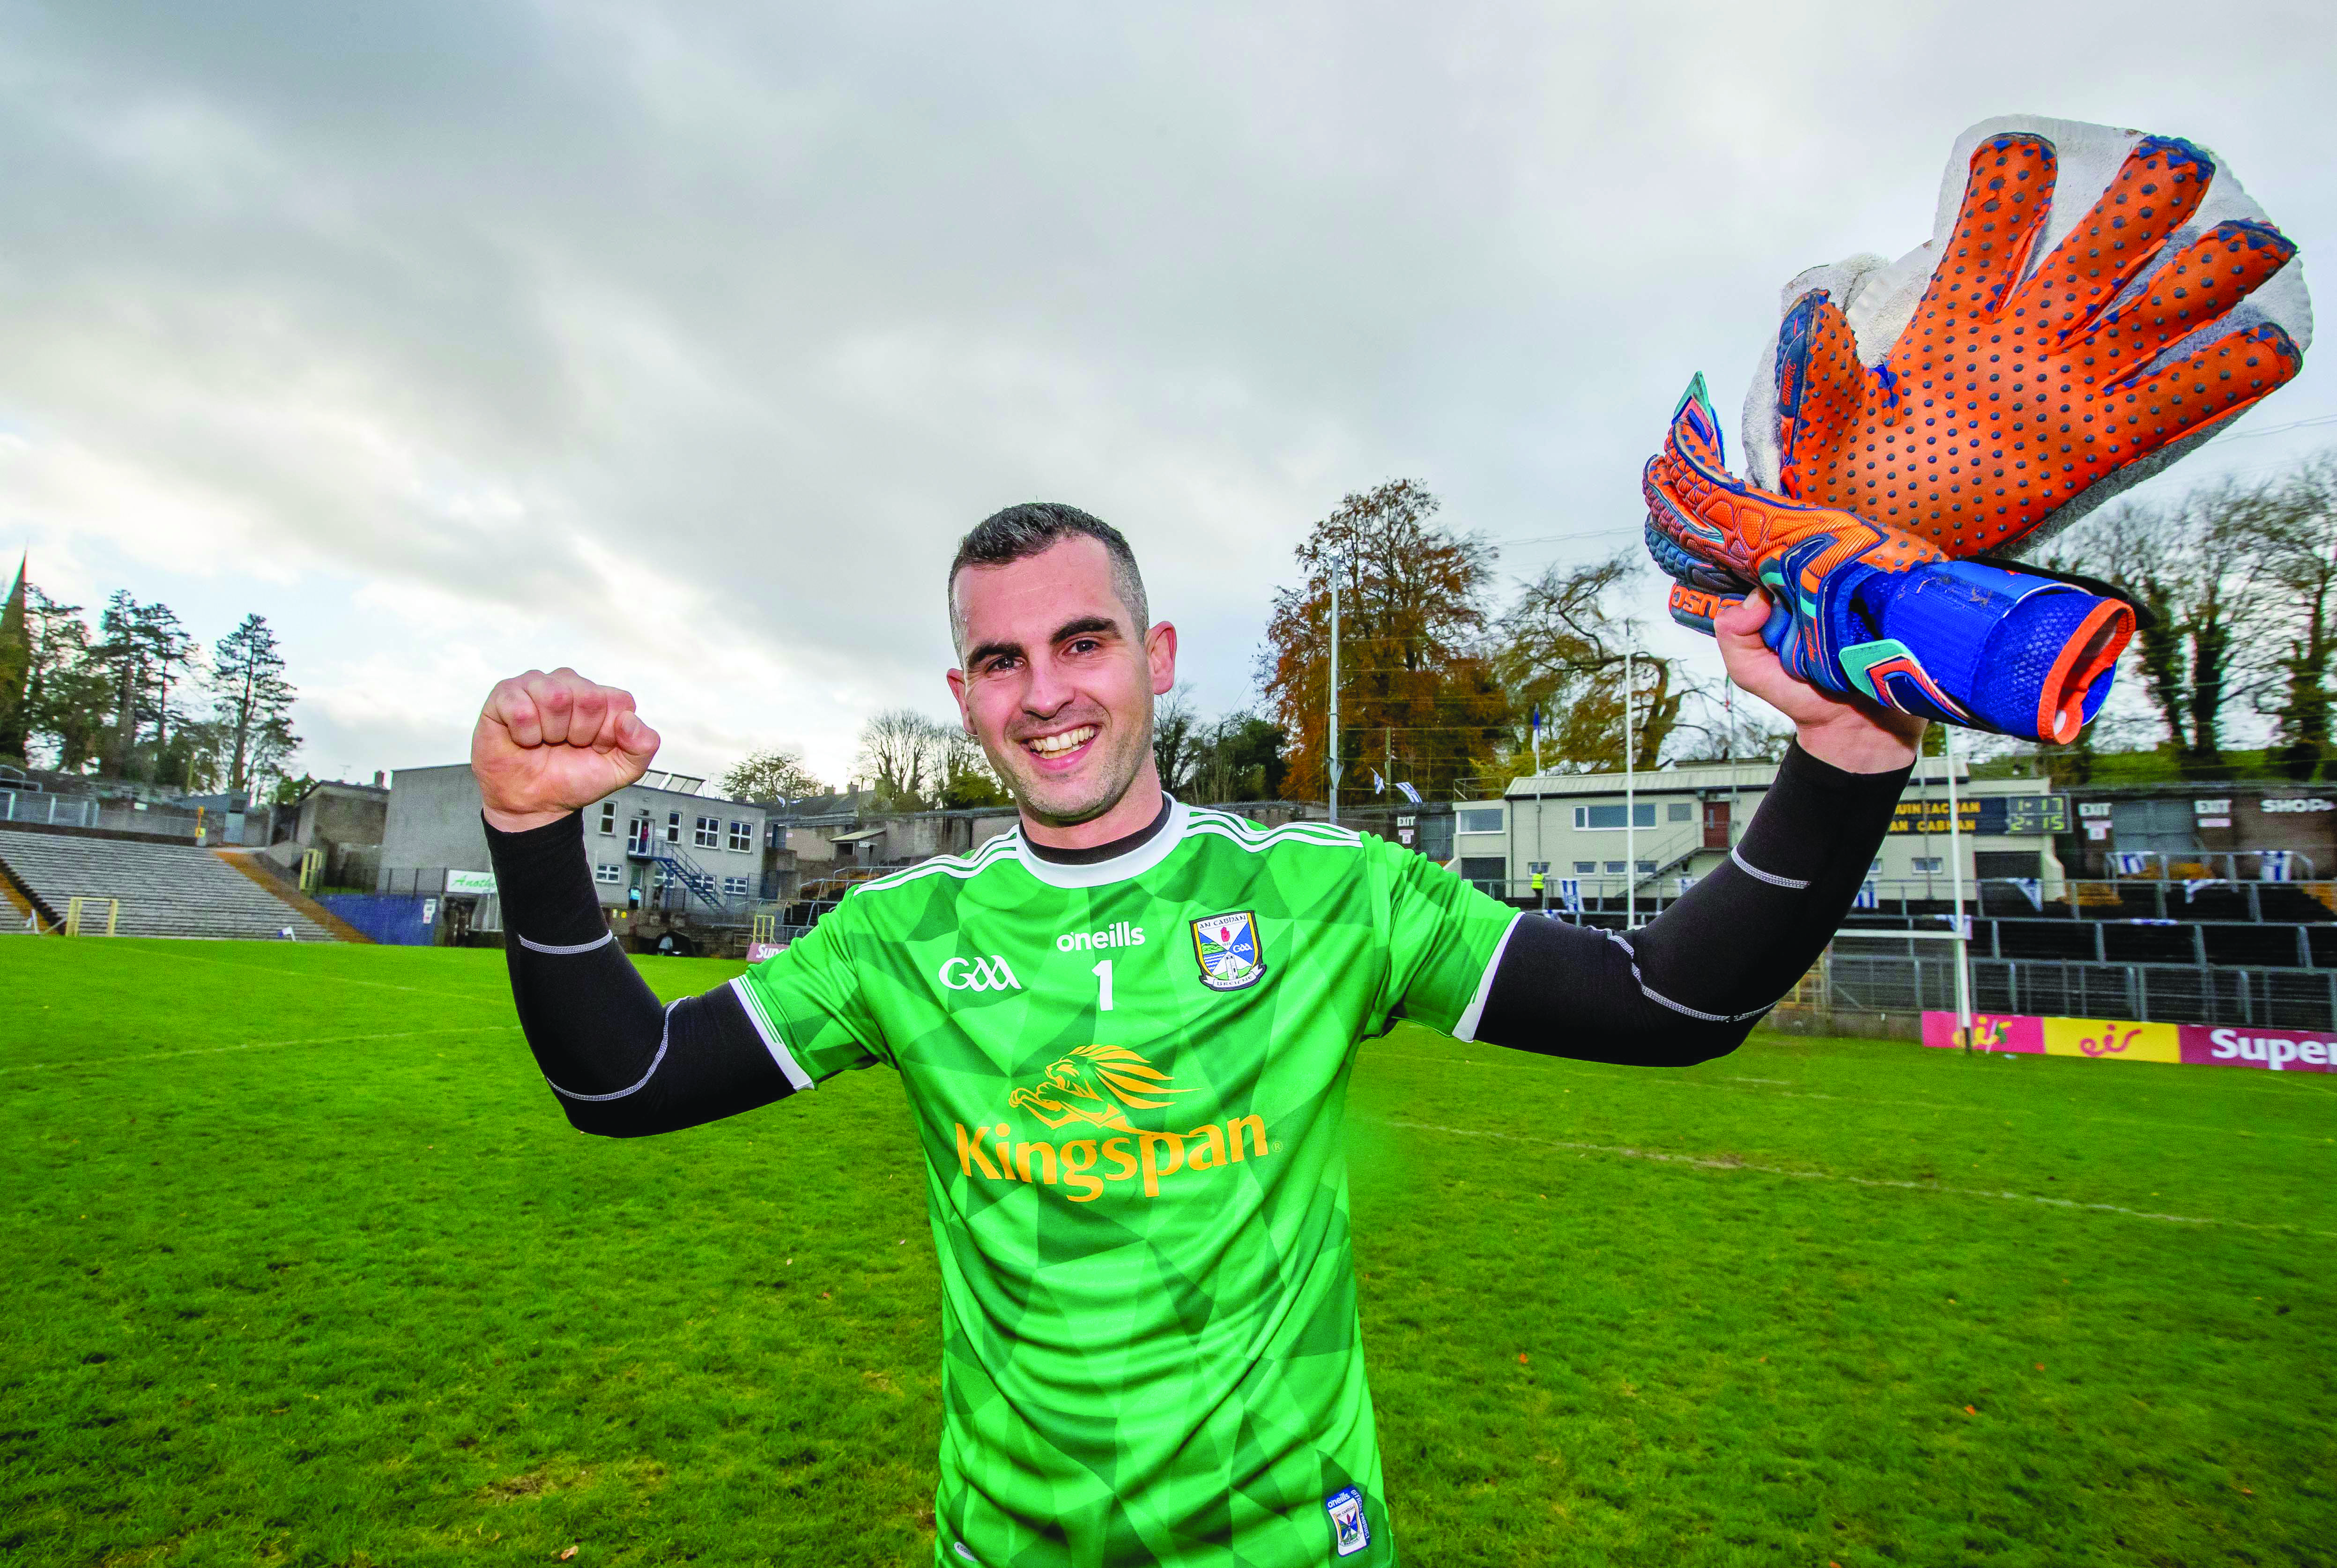 Cavan goalkeeper and captain Ray Galligan celebrates following his side’s dramatic one-point win over Monaghan after extra-time on Saturday afternoon